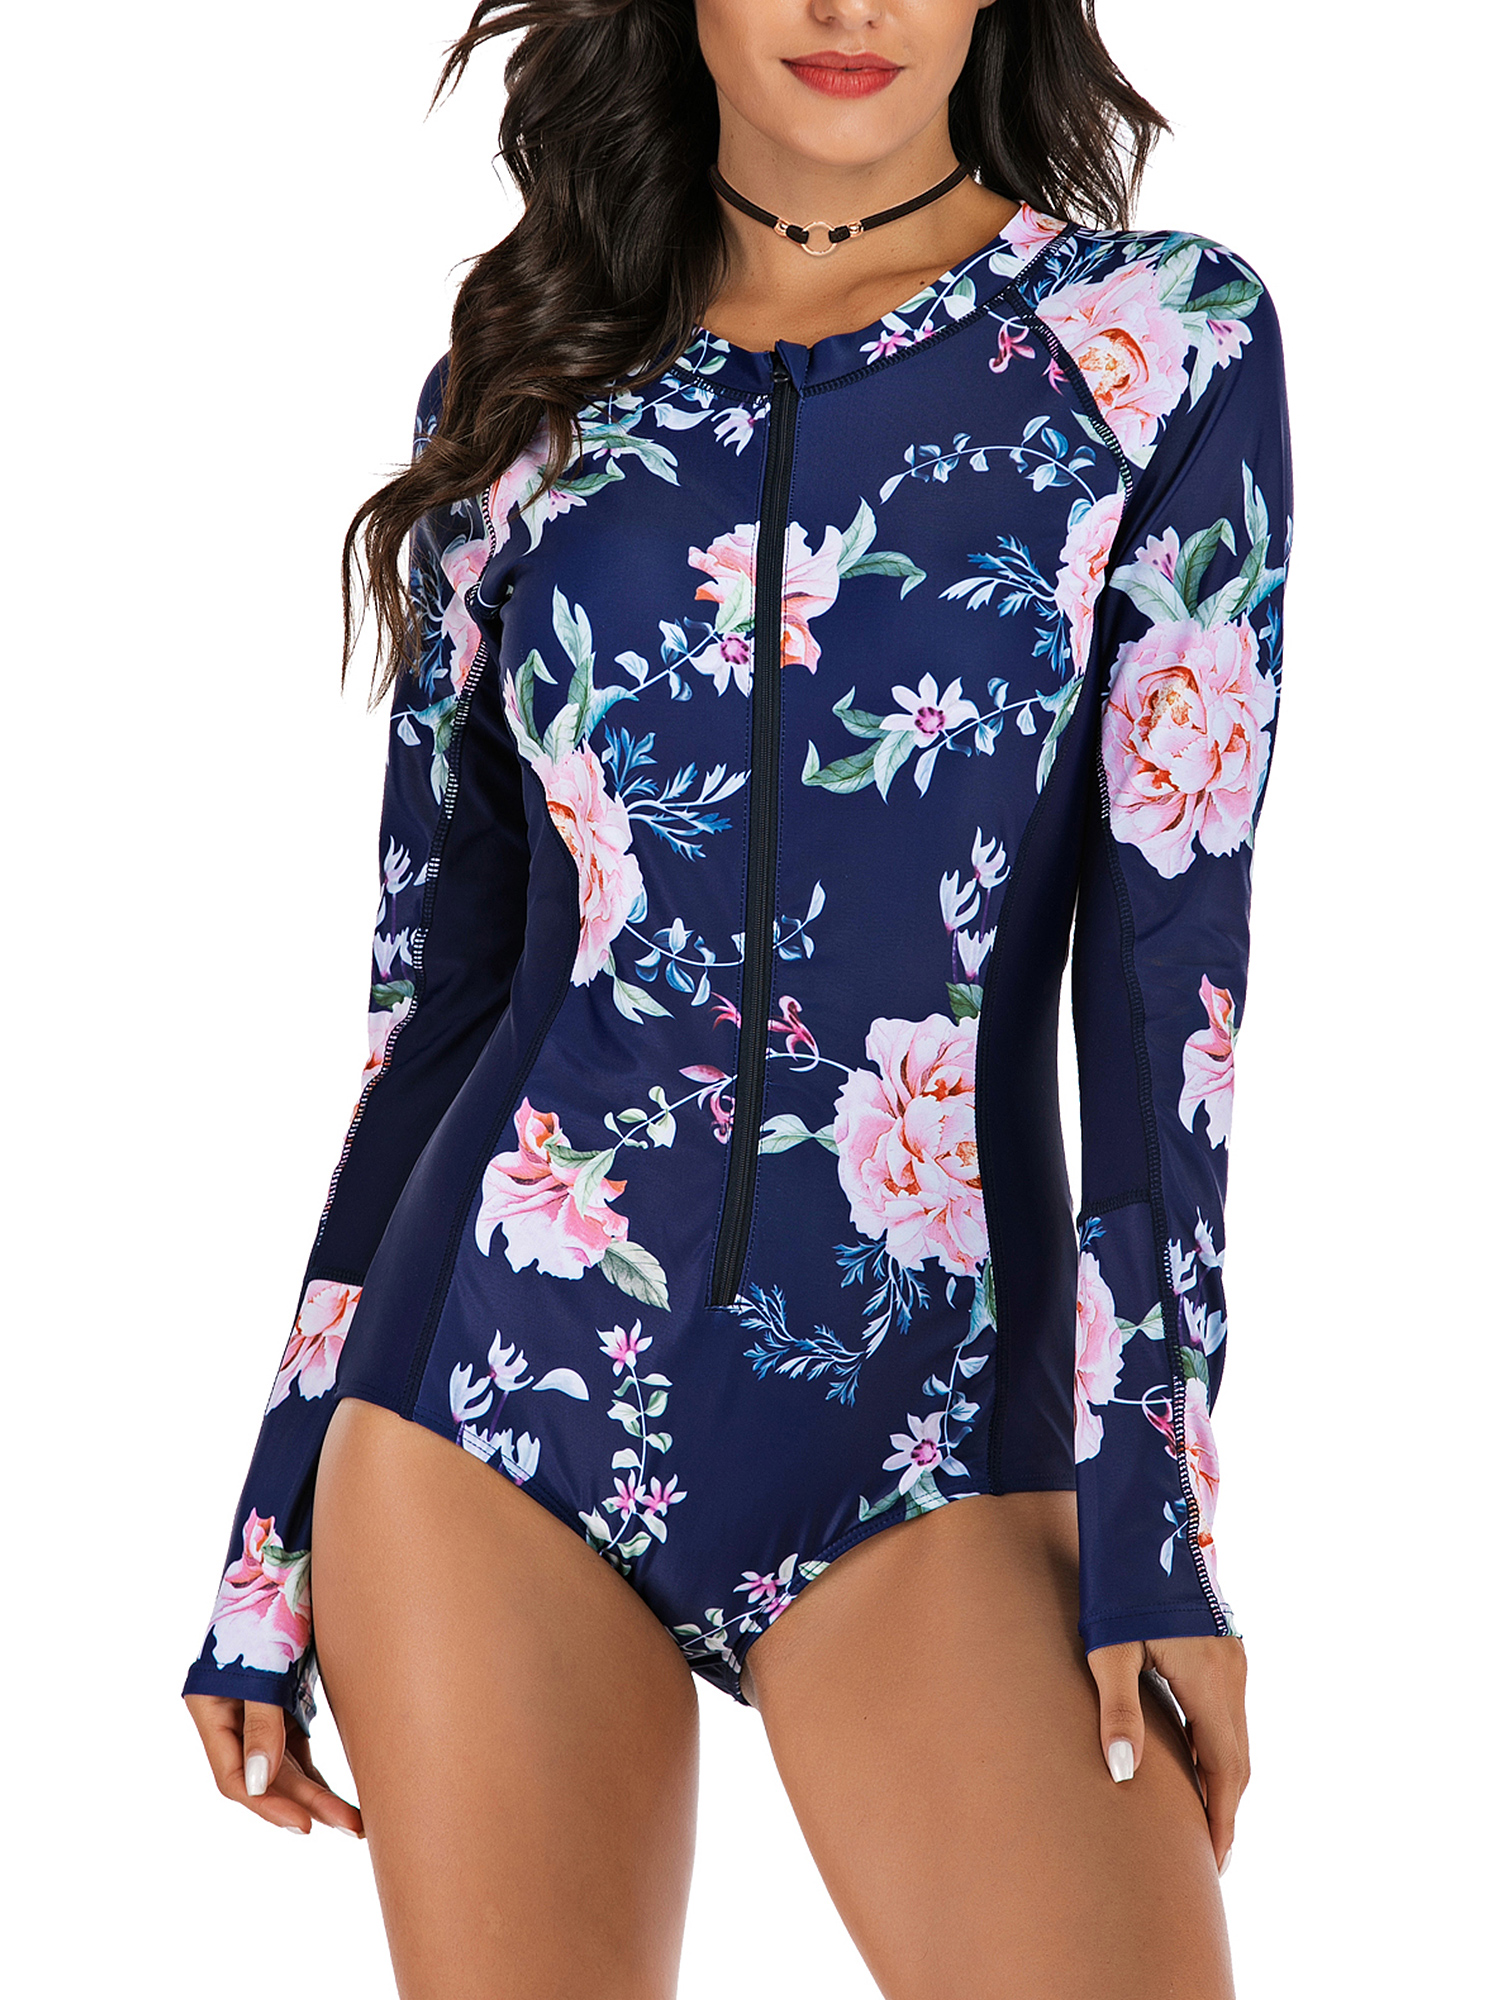 Women's One Piece Floral Surfing Swimsuit Long Sleeve Rash Guard Sun Protection Bathing Suit Swimwear Zip Front Athletic Tummy Control Surfing Wetsuit - image 4 of 8